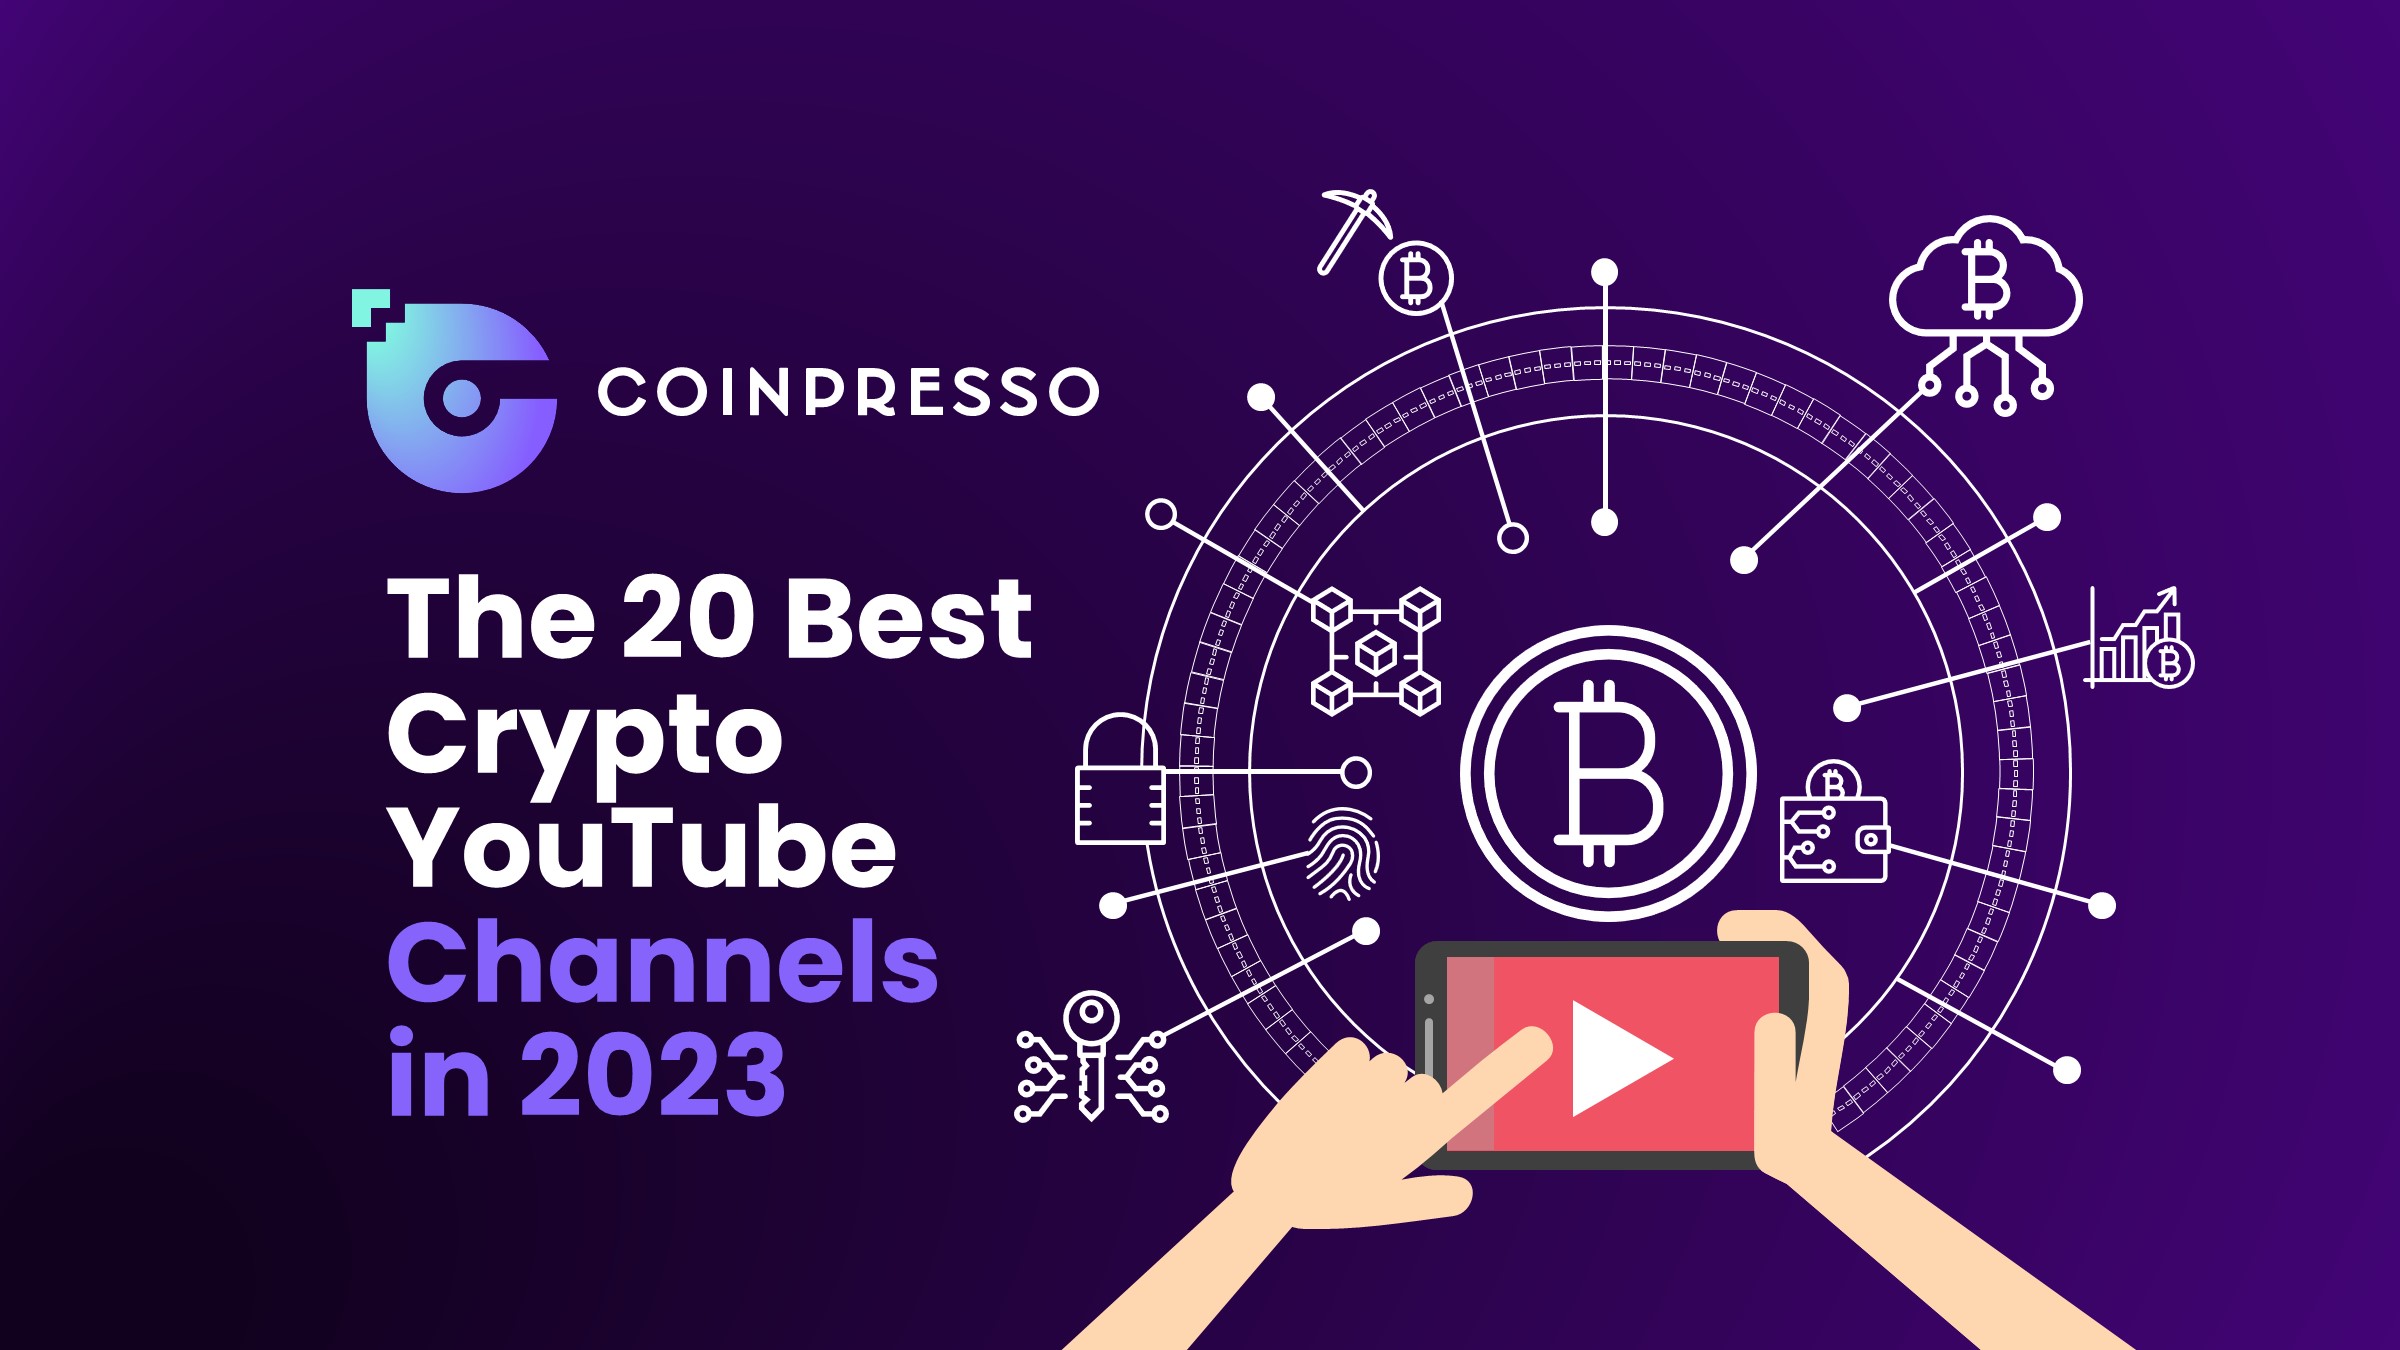 The 20 Best Crypto YouTube Channels in 2023